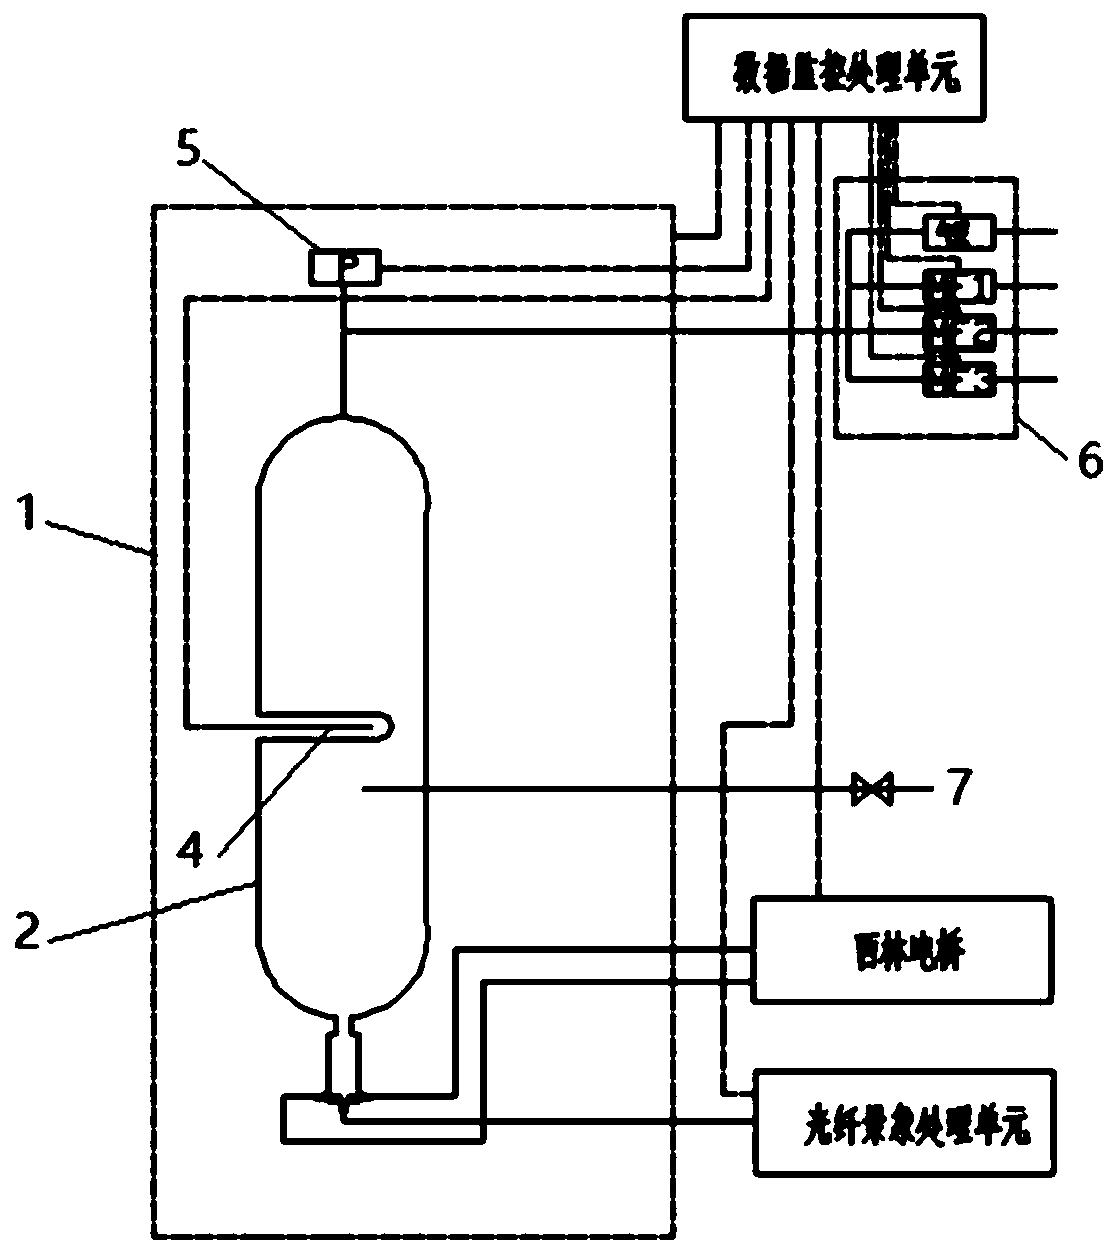 A testing device and method for testing the liquefaction temperature of insulating gas